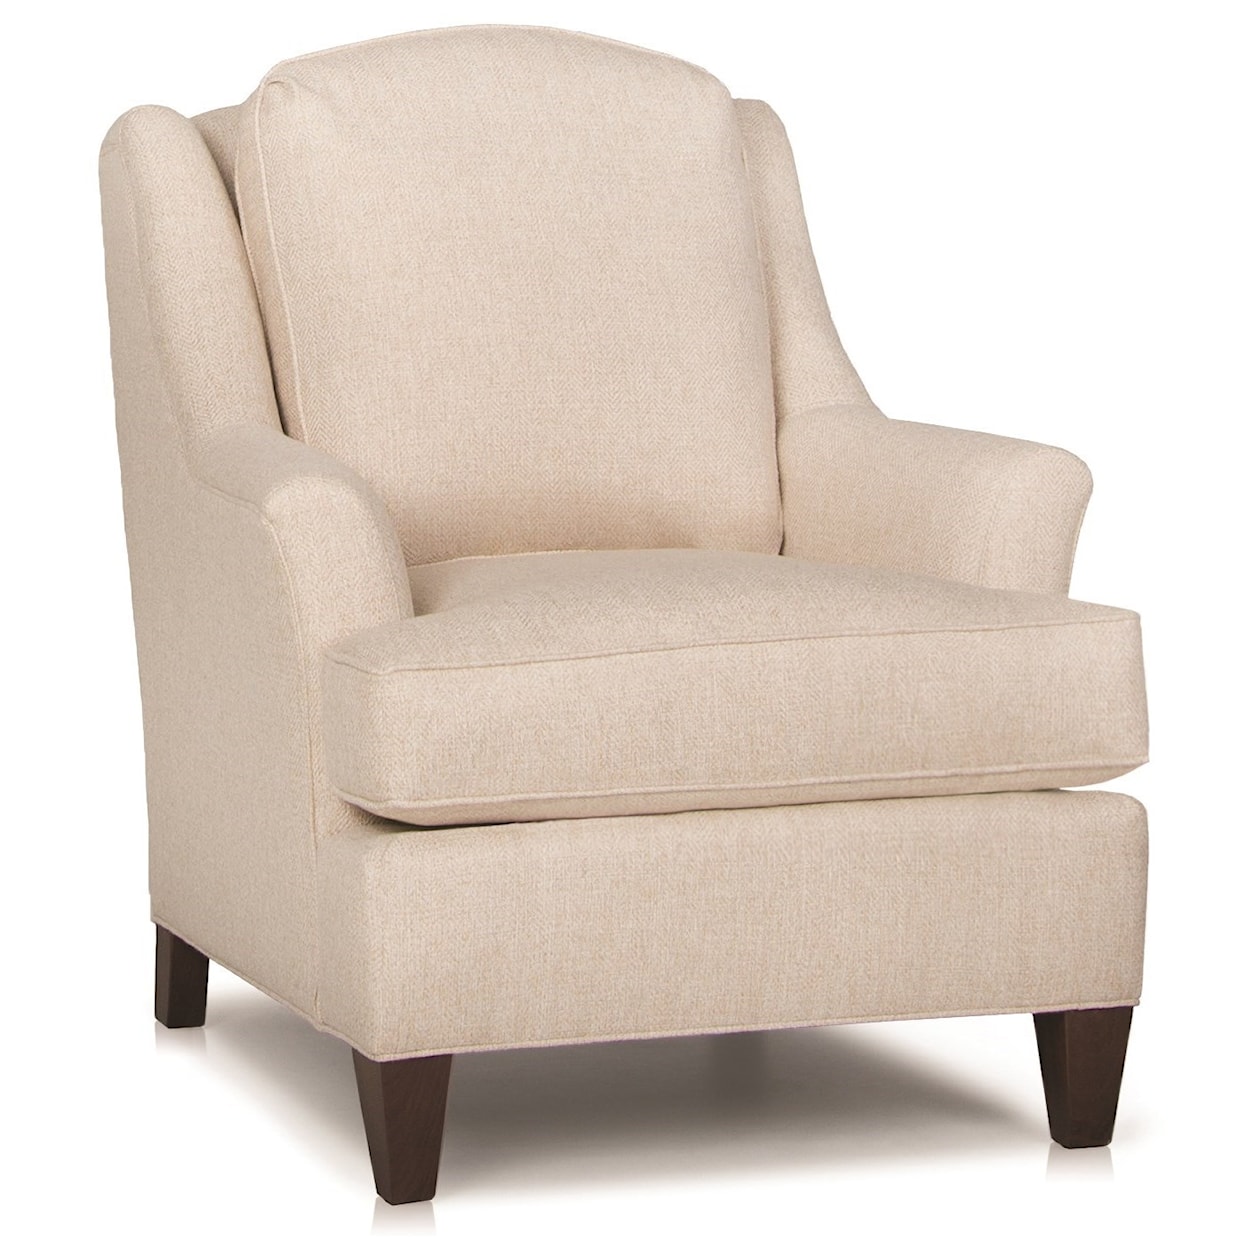 Smith Brothers 944 Upholstered Chair